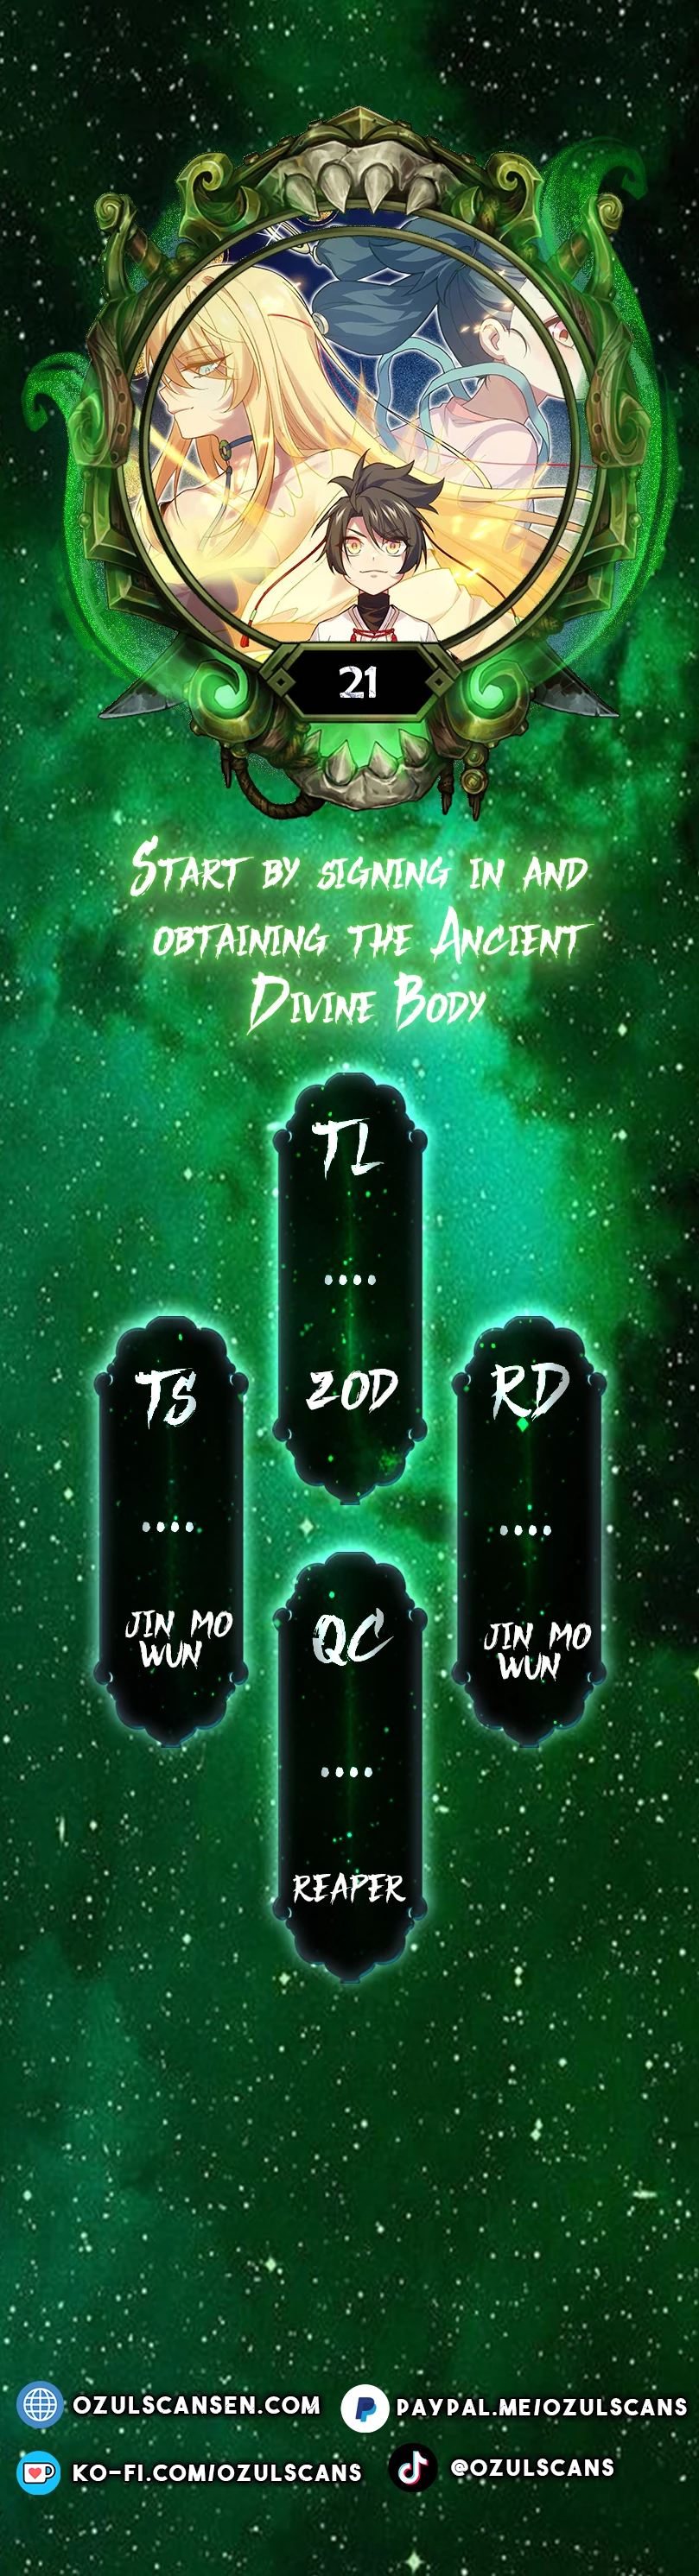 Start by signing in and obtaining the Ancient Divine Body - chapter 21 - #1